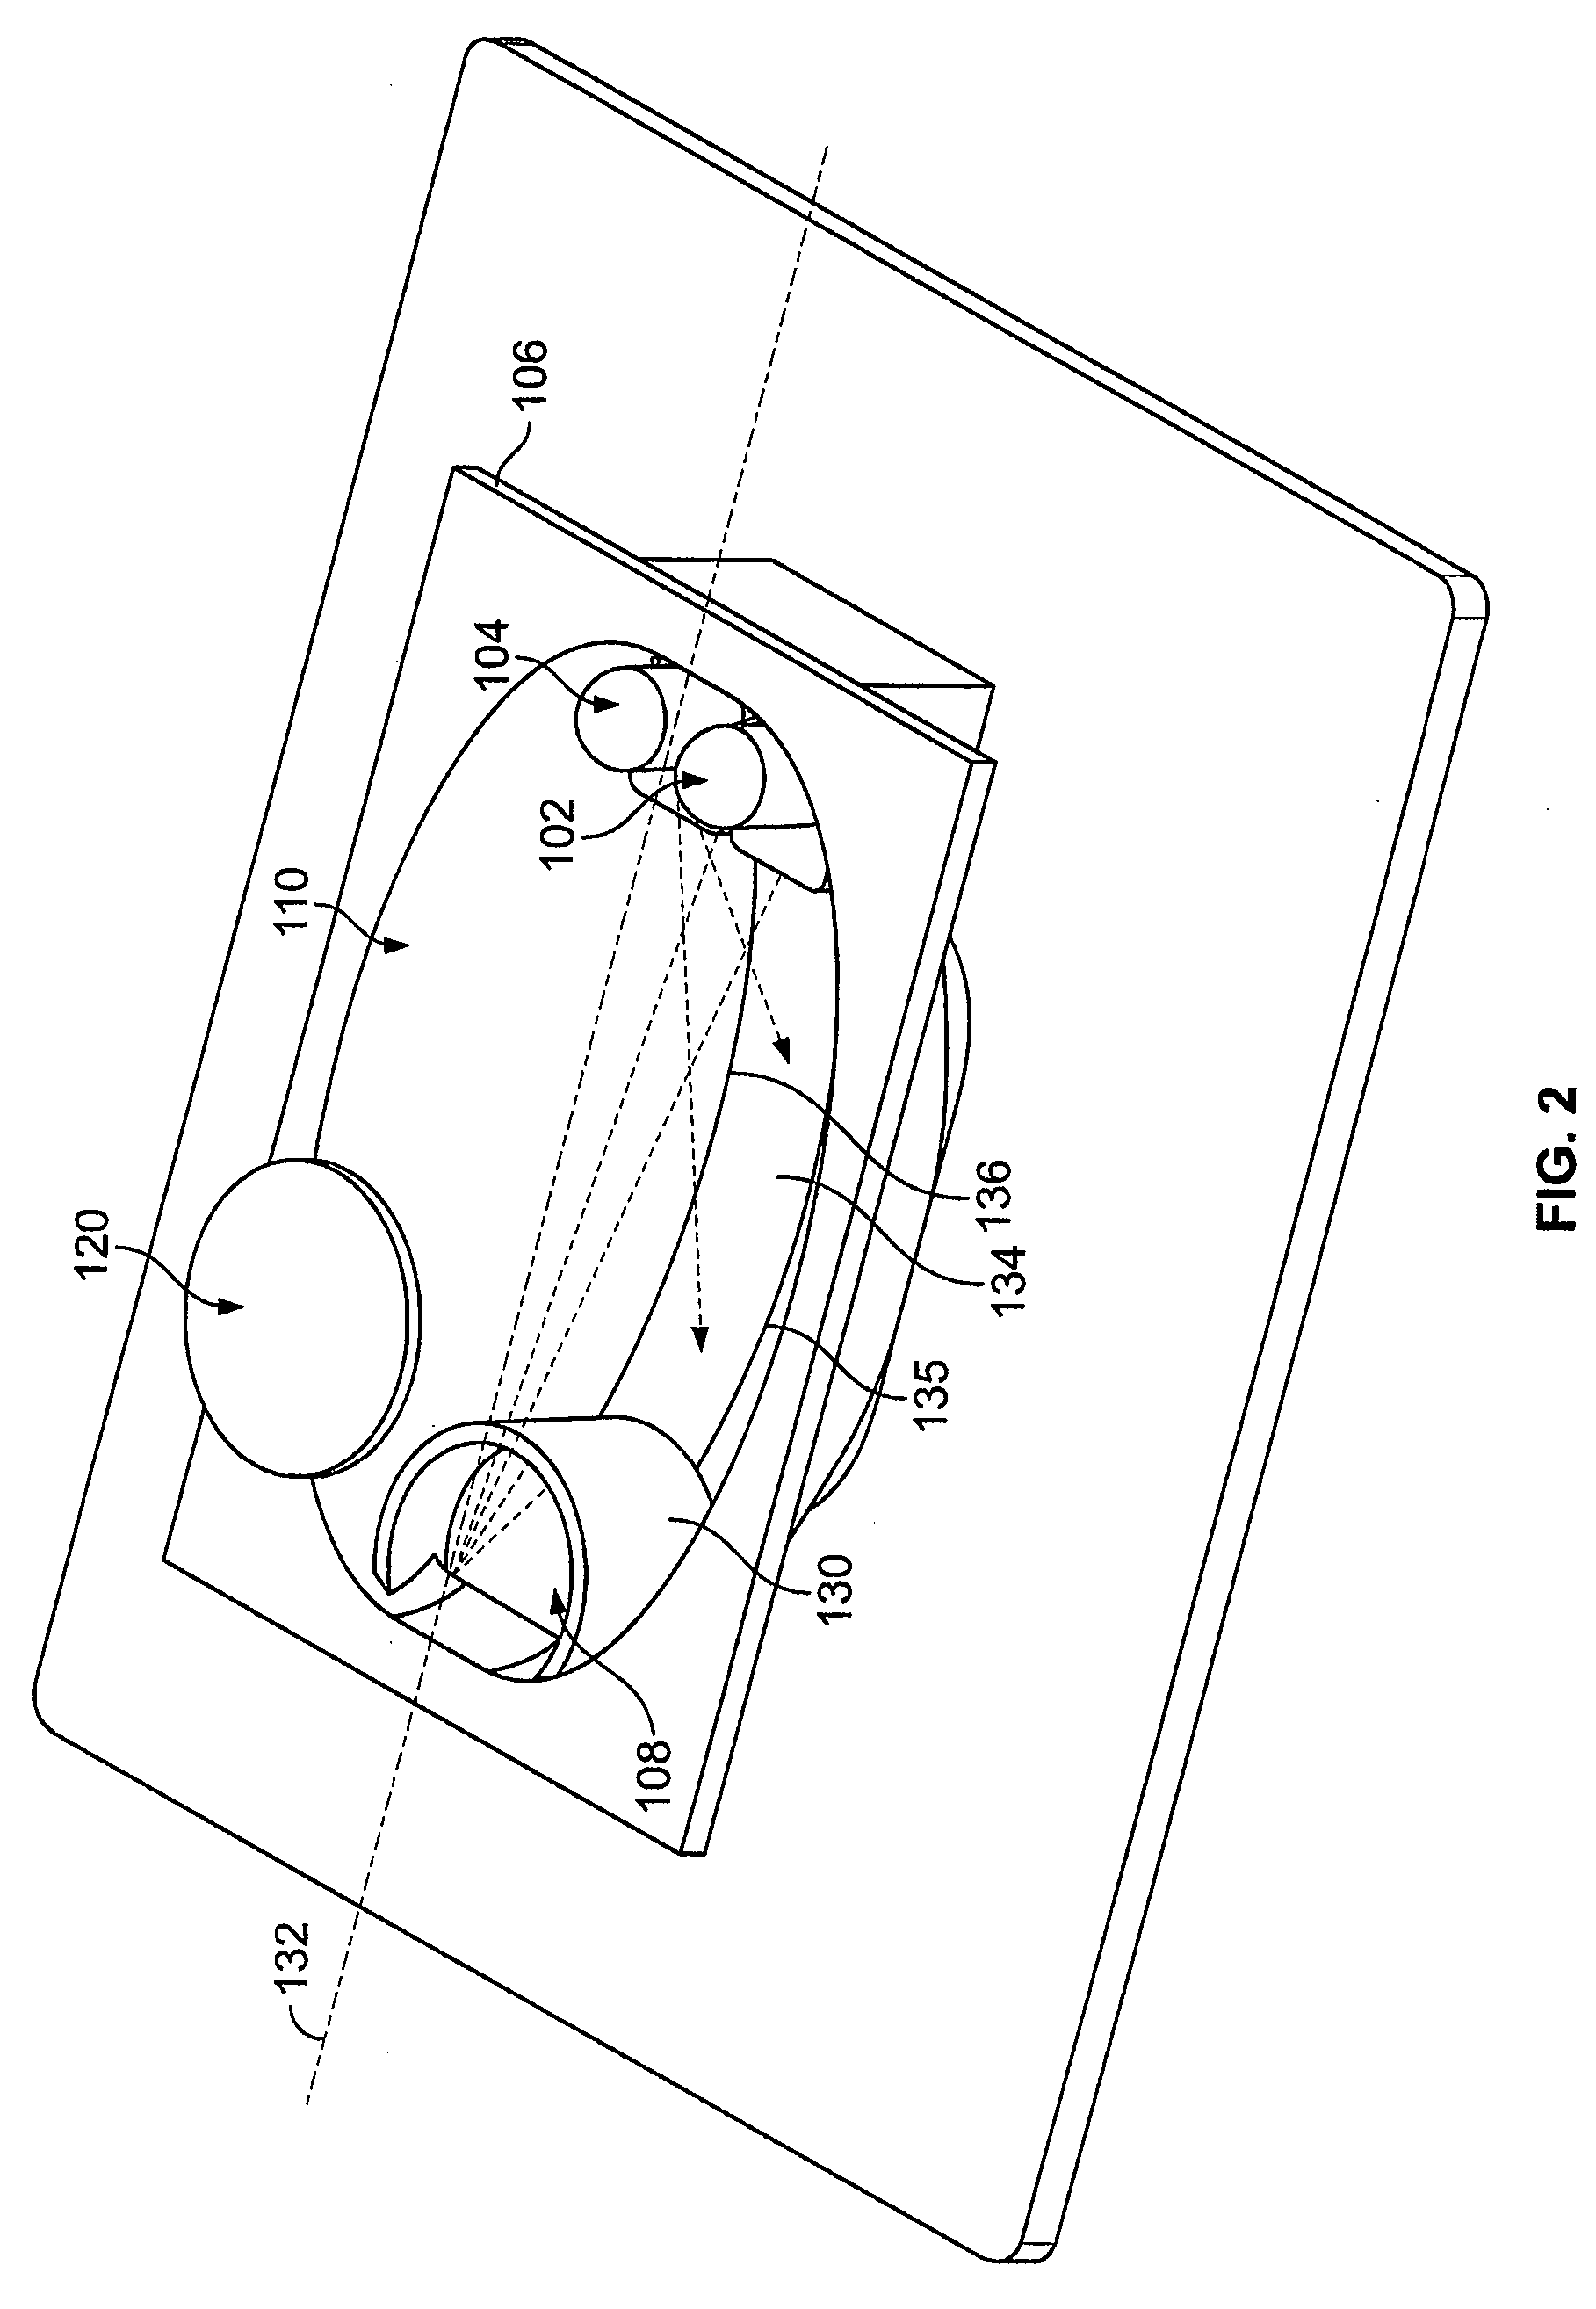 Gas Sensor Array with a Light Channel in the Form of a Conical Section Rotational Member